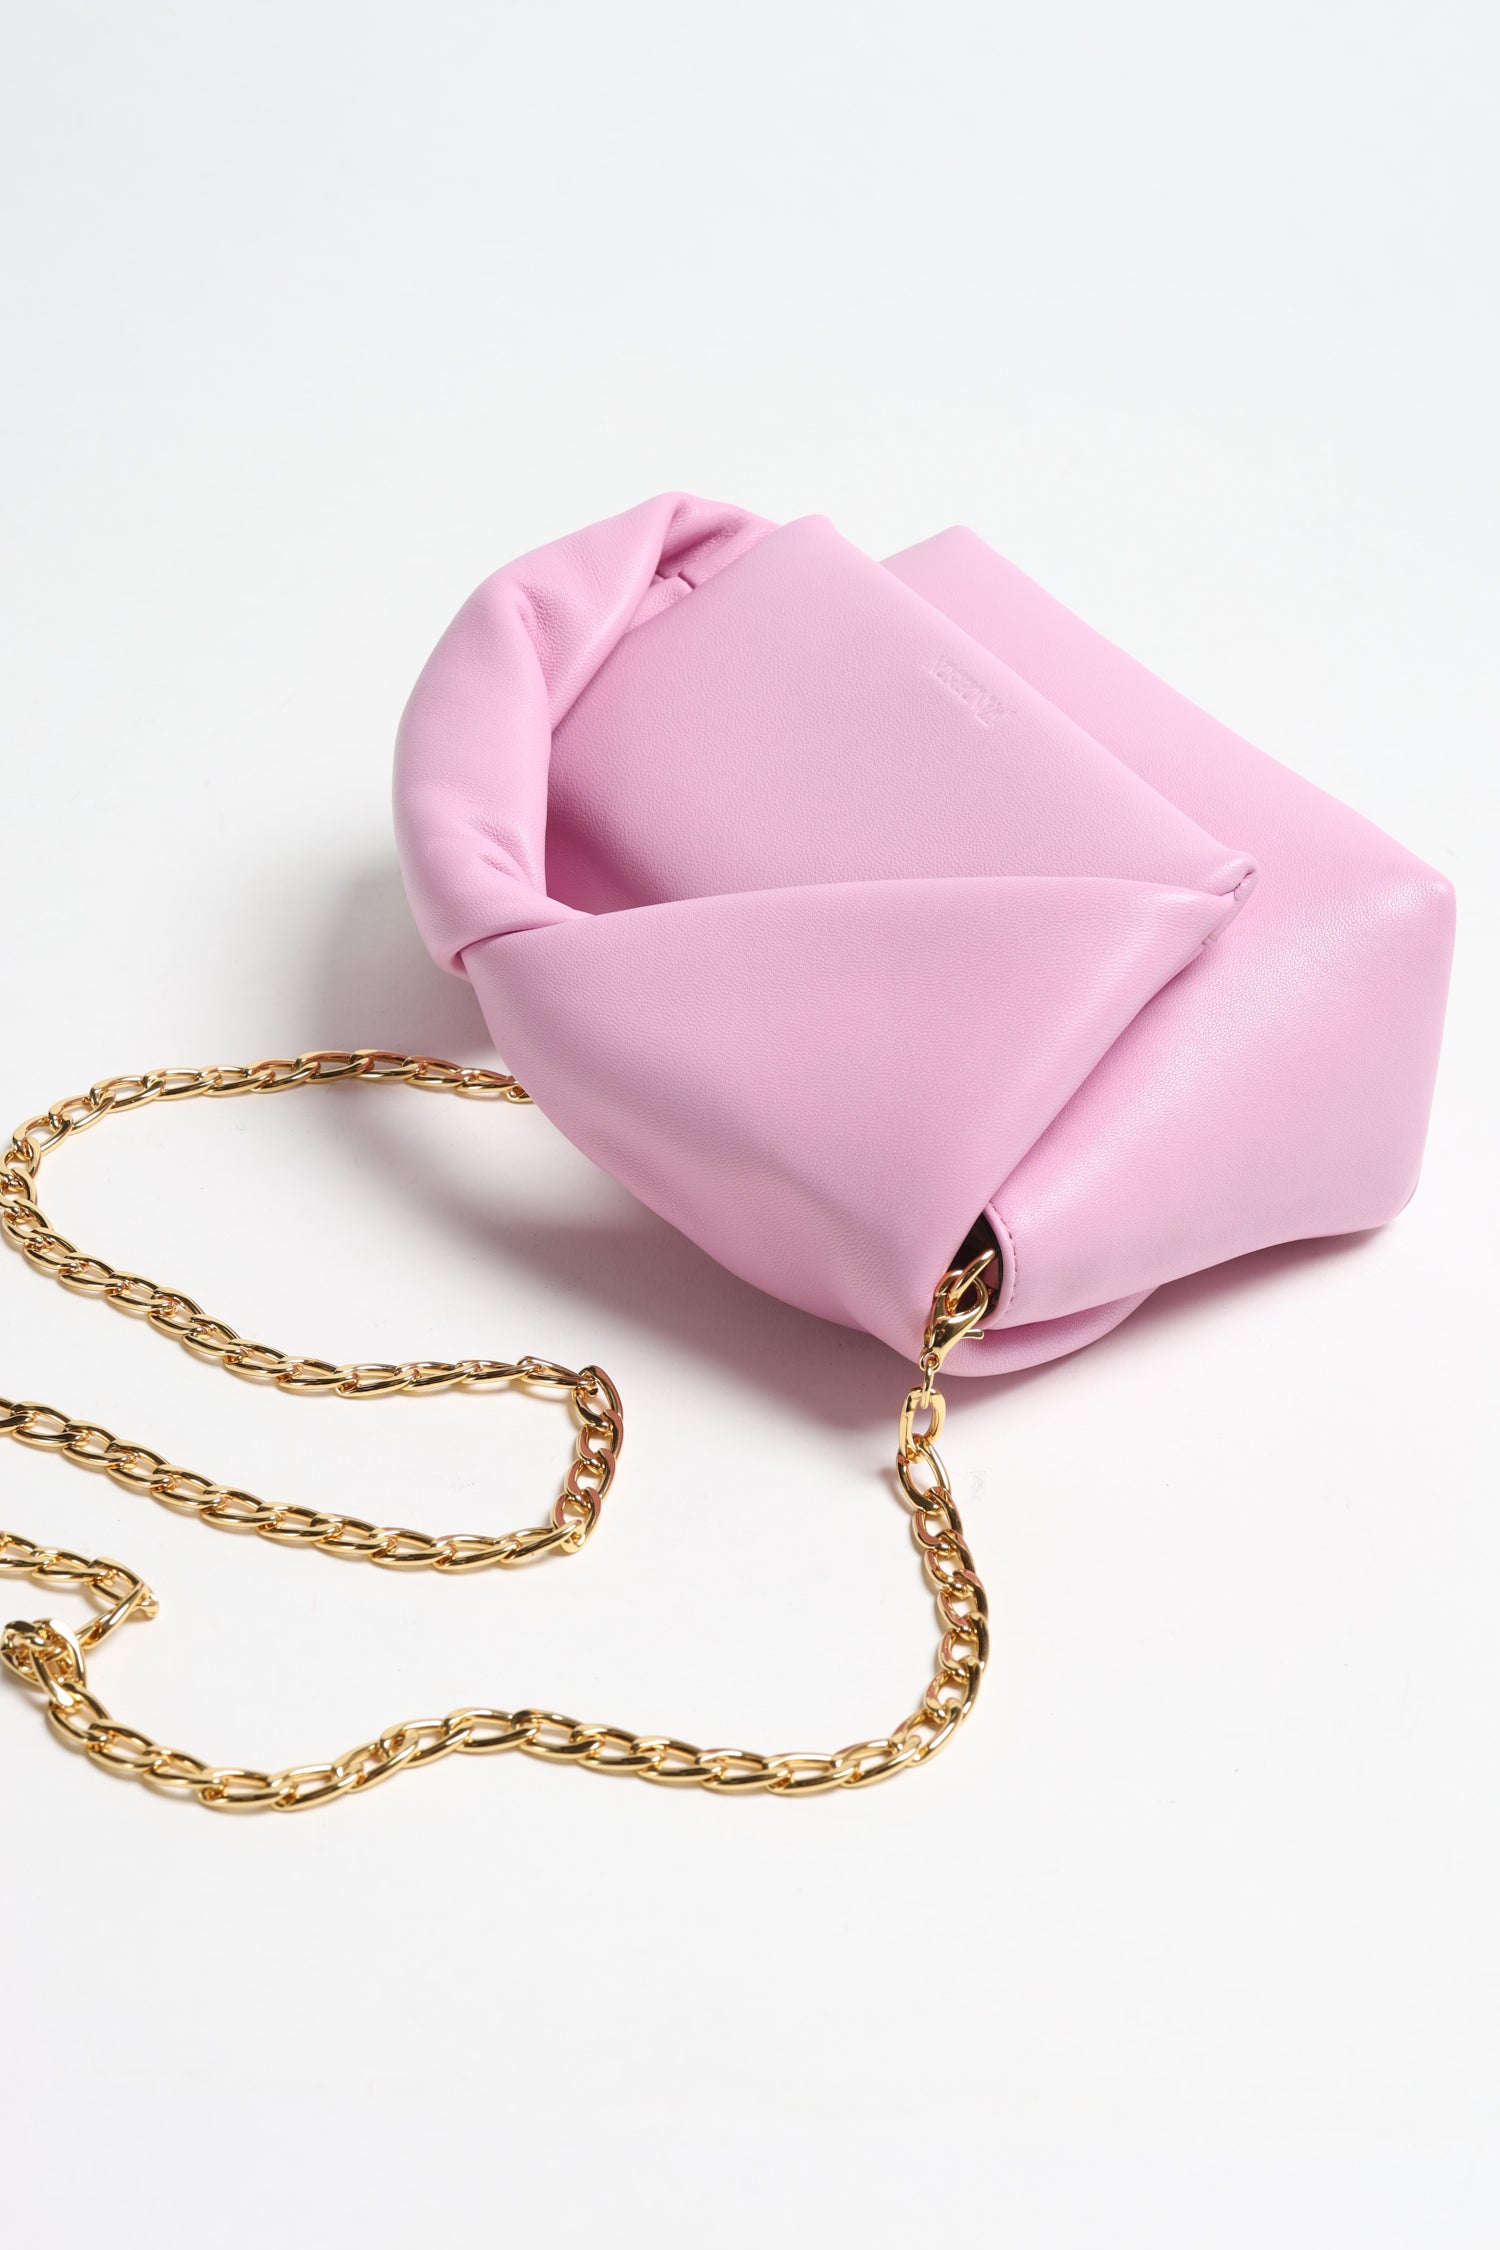 Tasche Midi Twister in Baby PinkJW Anderson - Anita Hass